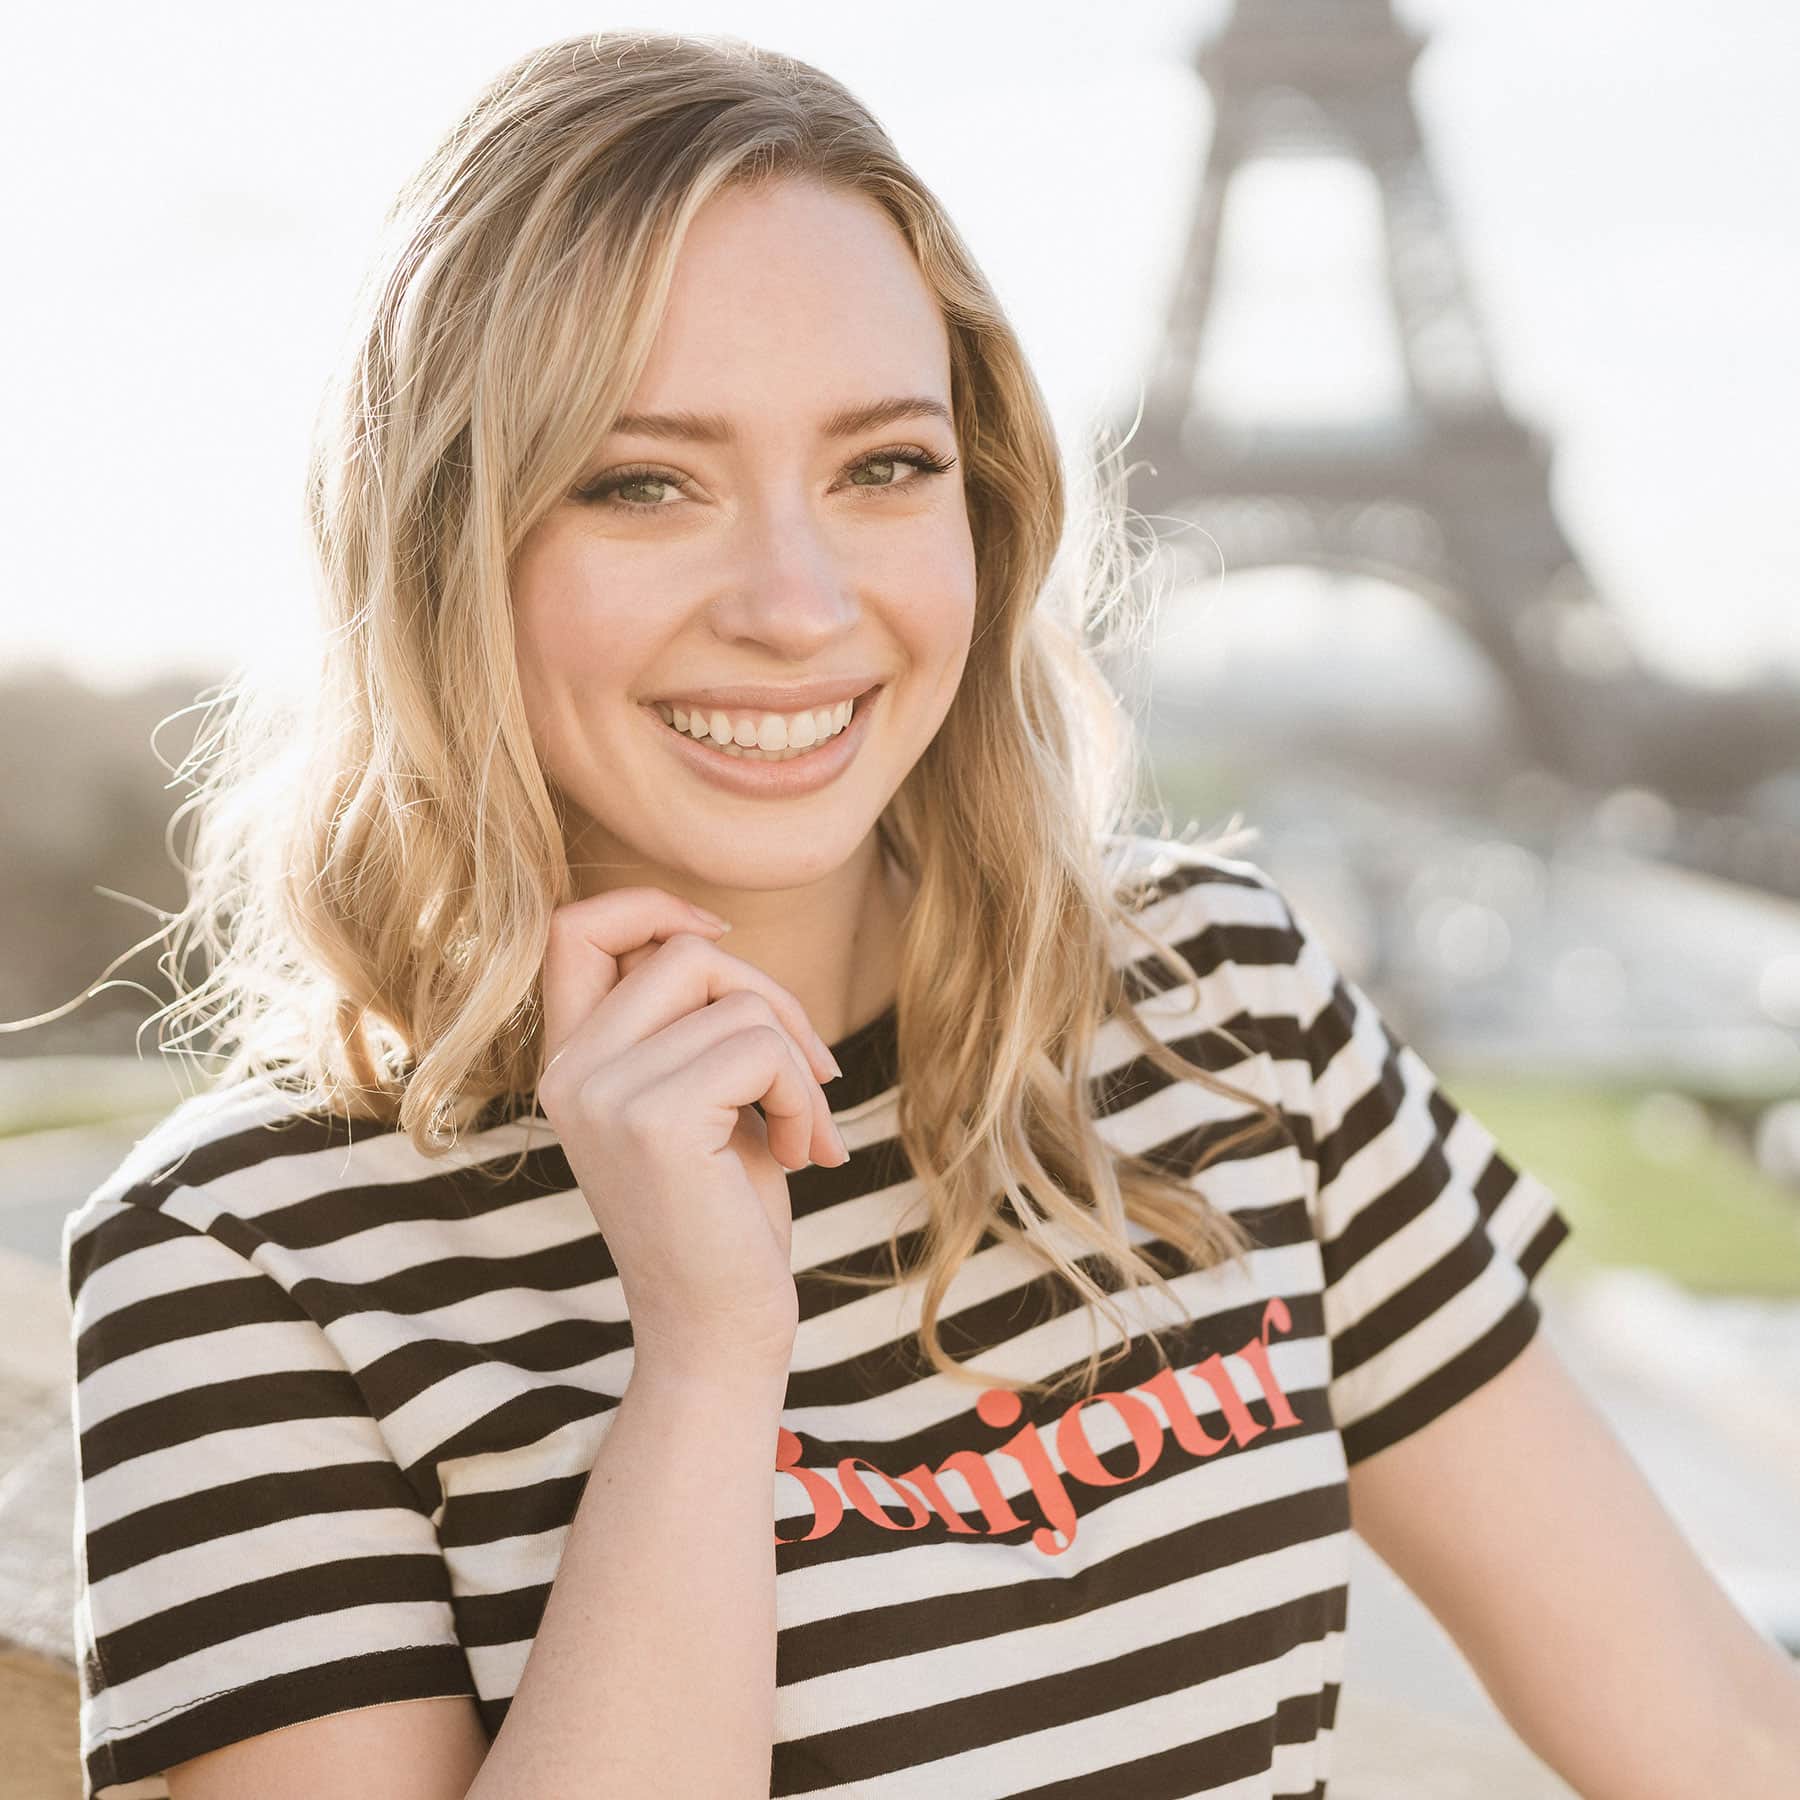 Tessa in front of the Eiffel Tower in Paris, France wearing a shirt that says Bonjour